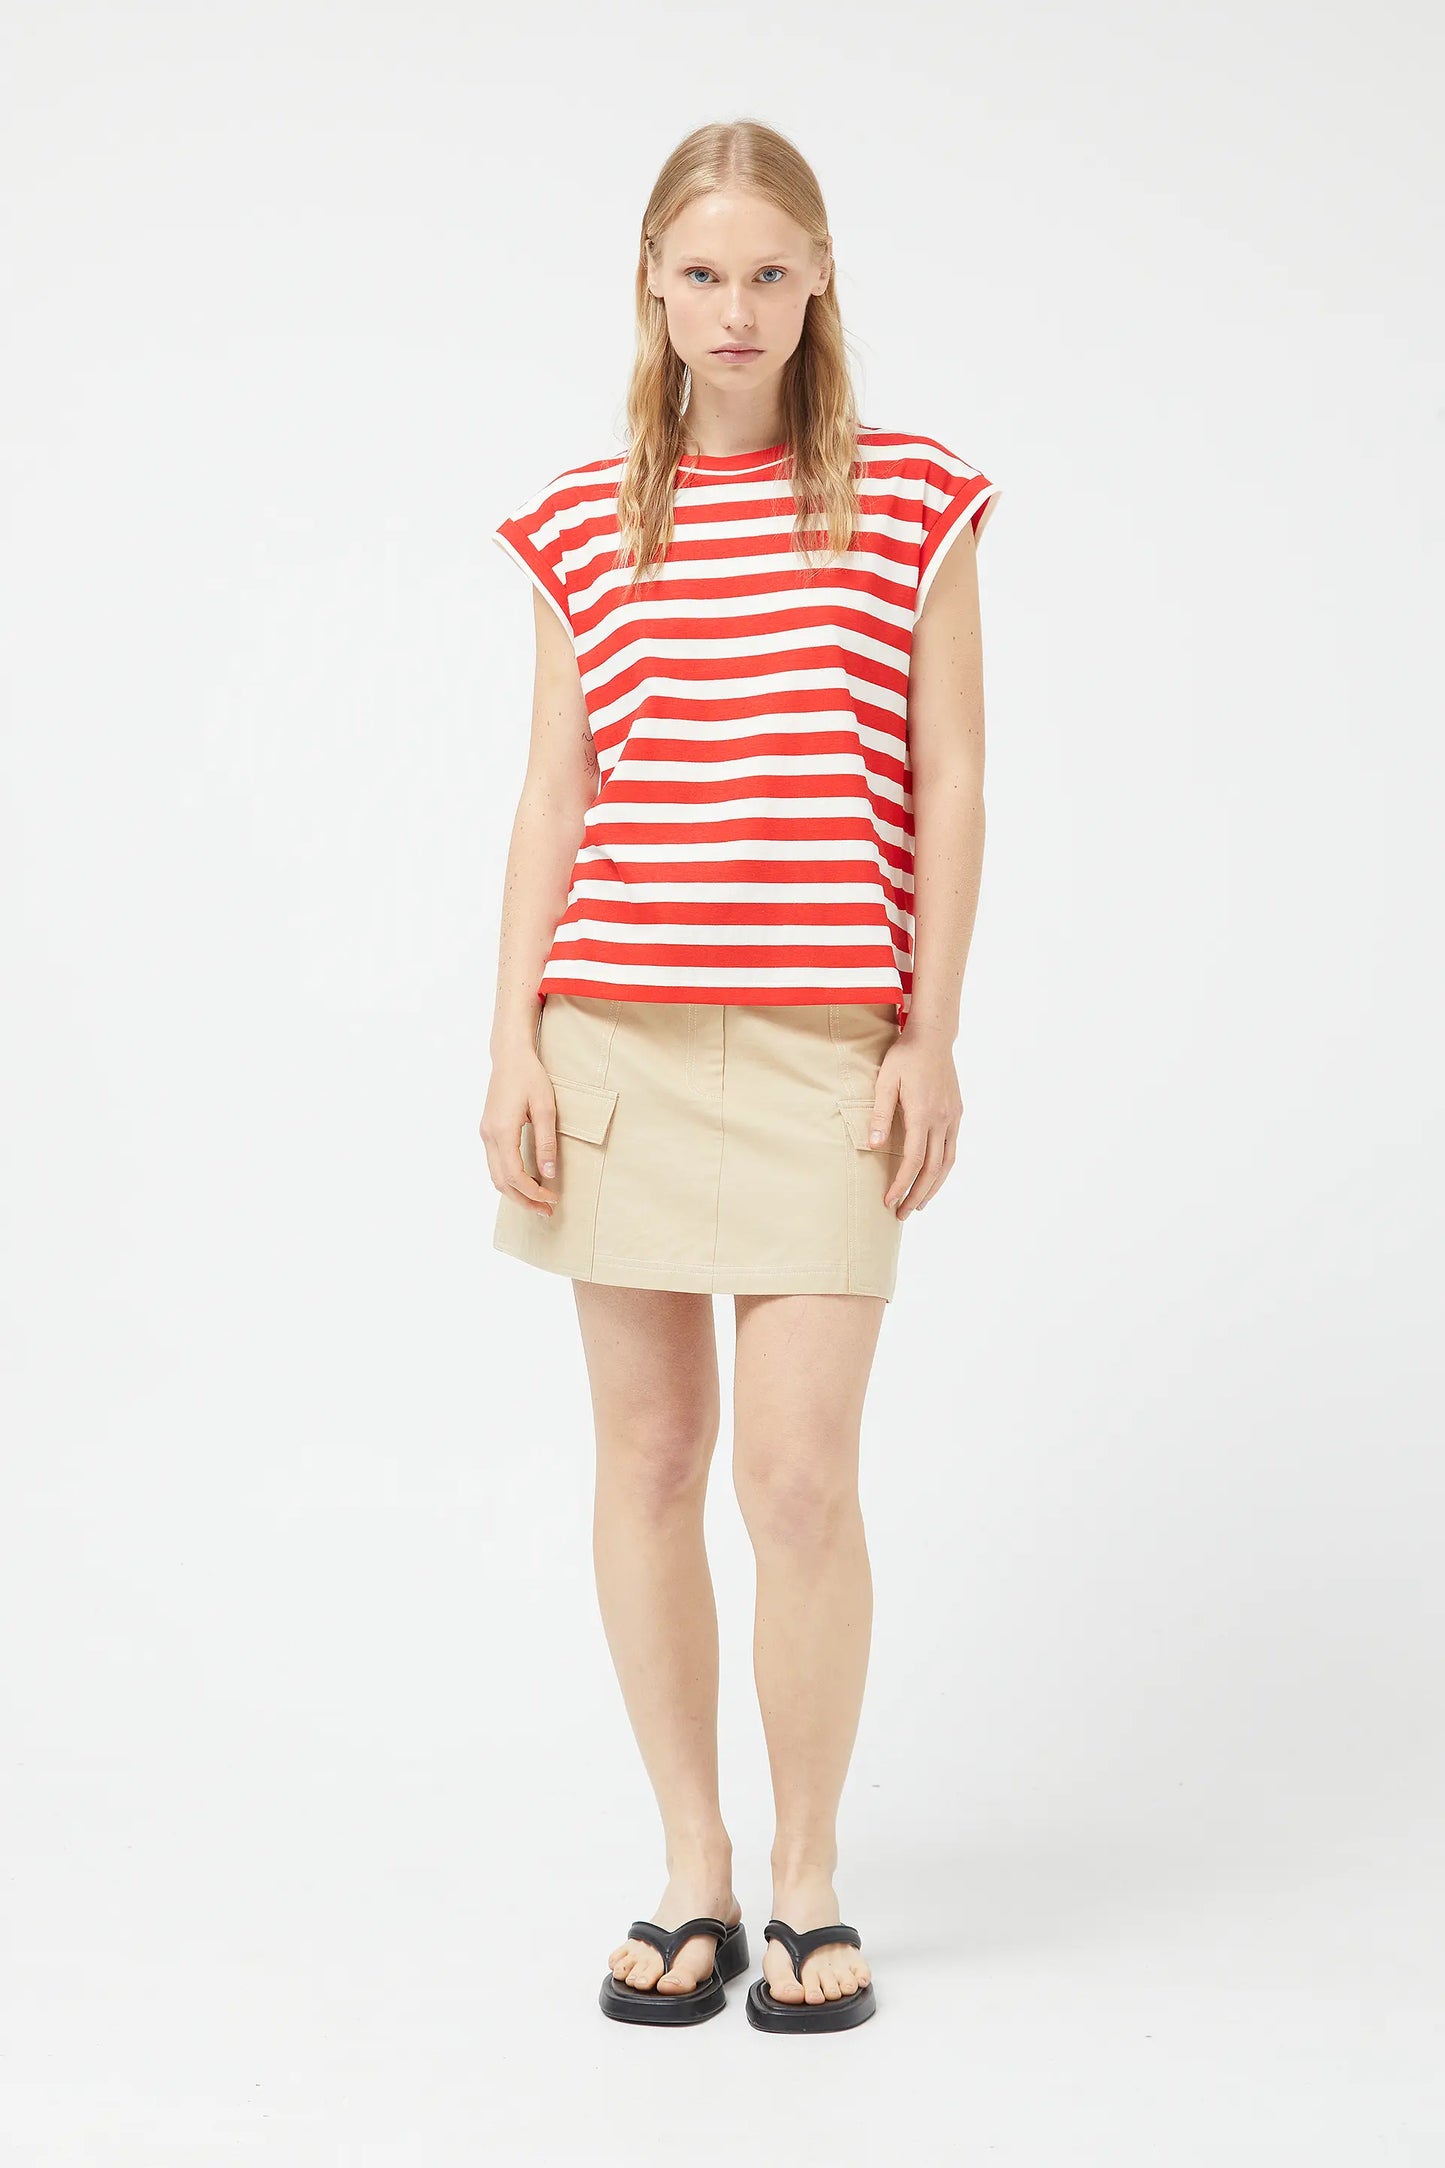 Red striped short sleeve t-shirt